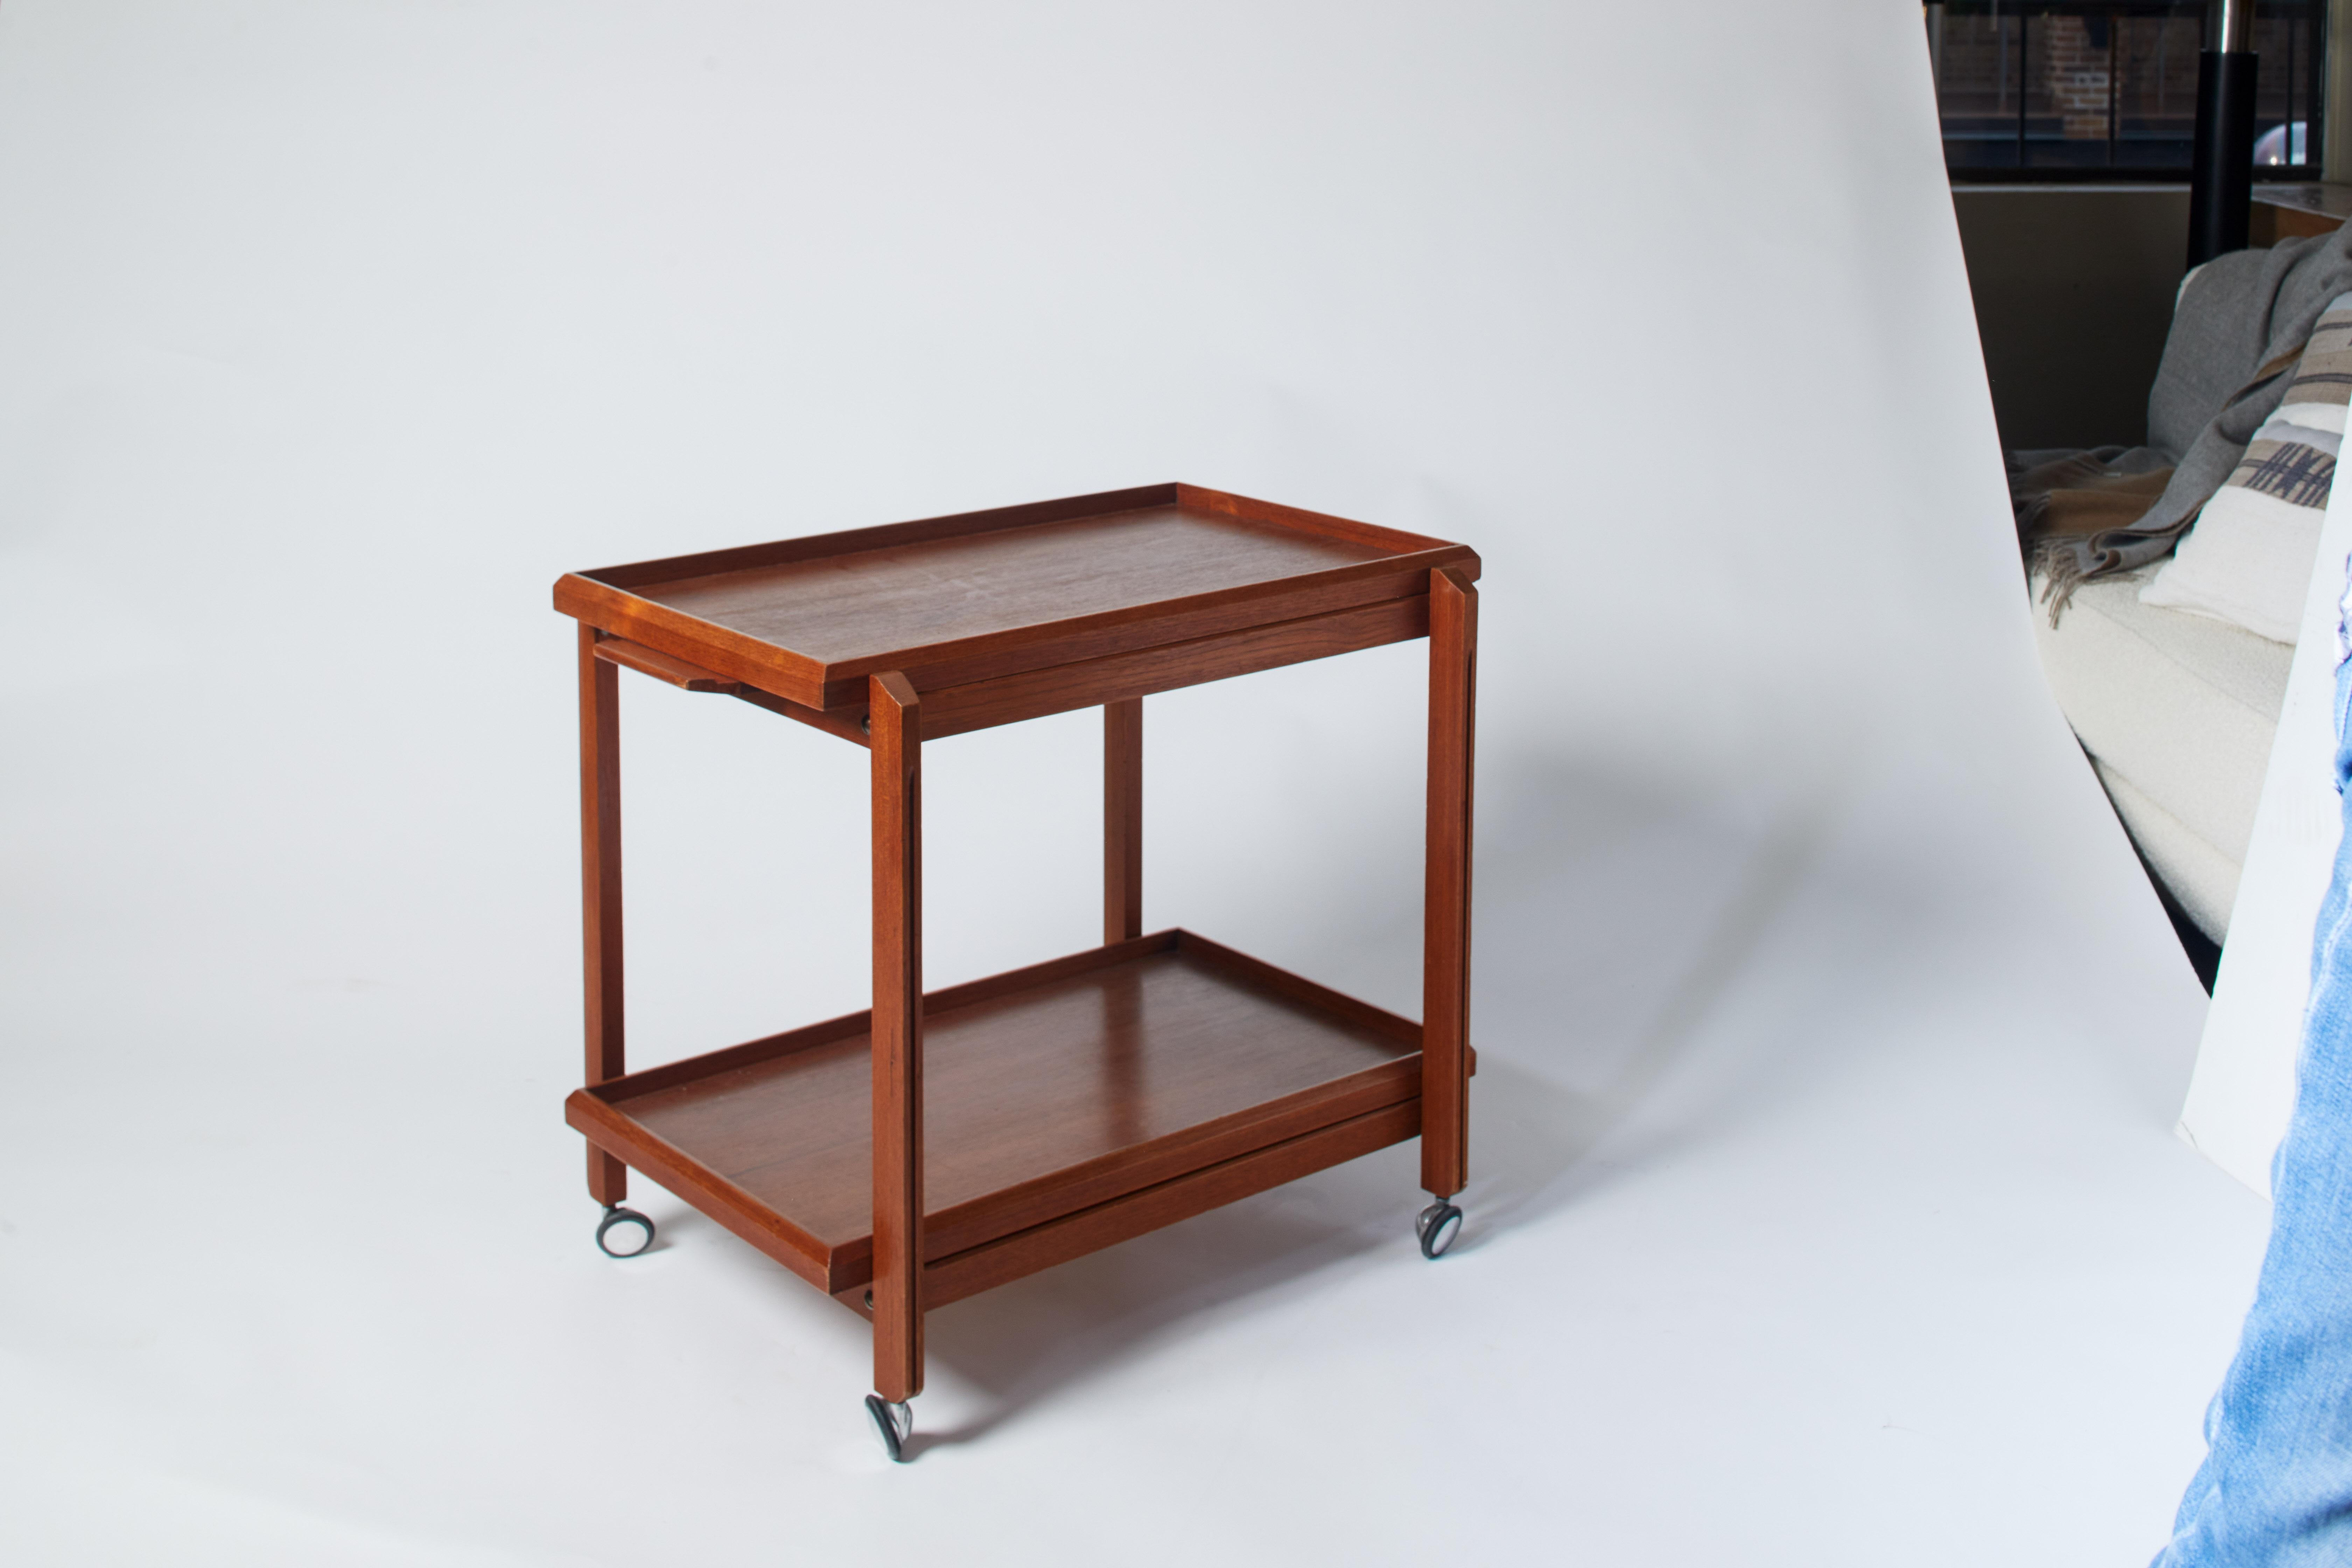 1960s Italian French two-tier oak trolley with removable tray and wheels at base.